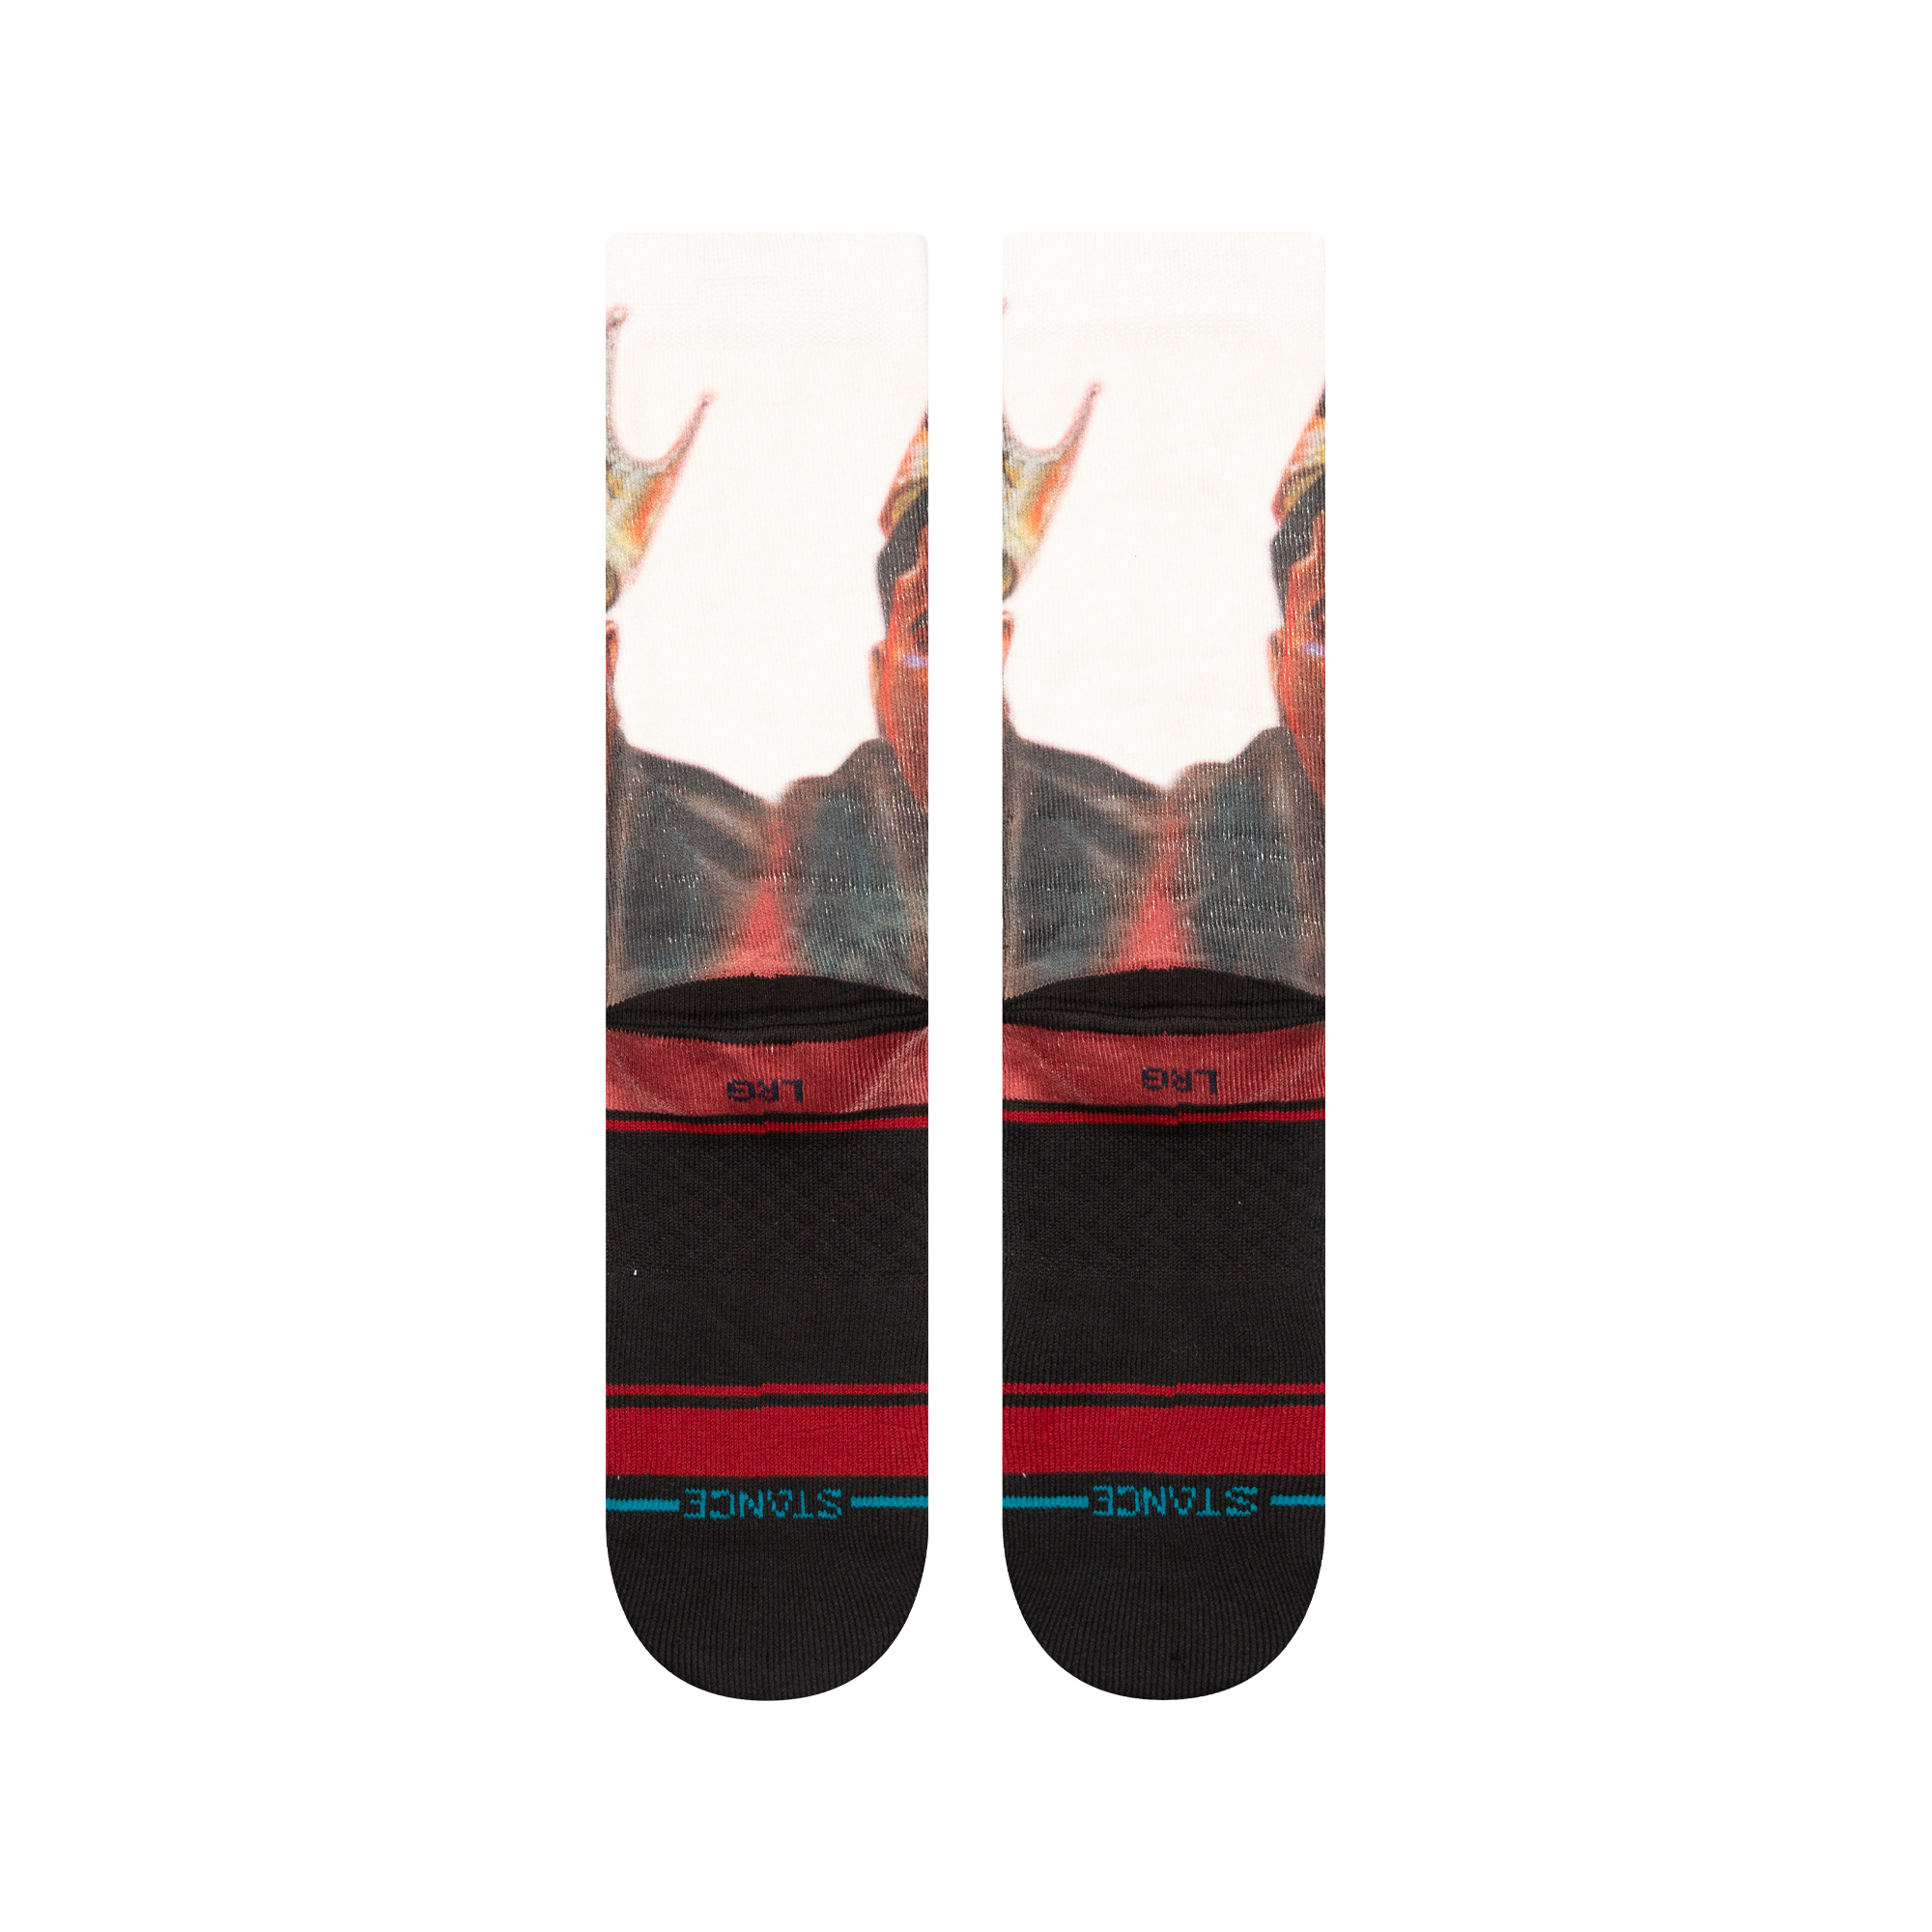 Notorious B.I.G. X Socks | The Stance Skys Limit Crew Stance Poly